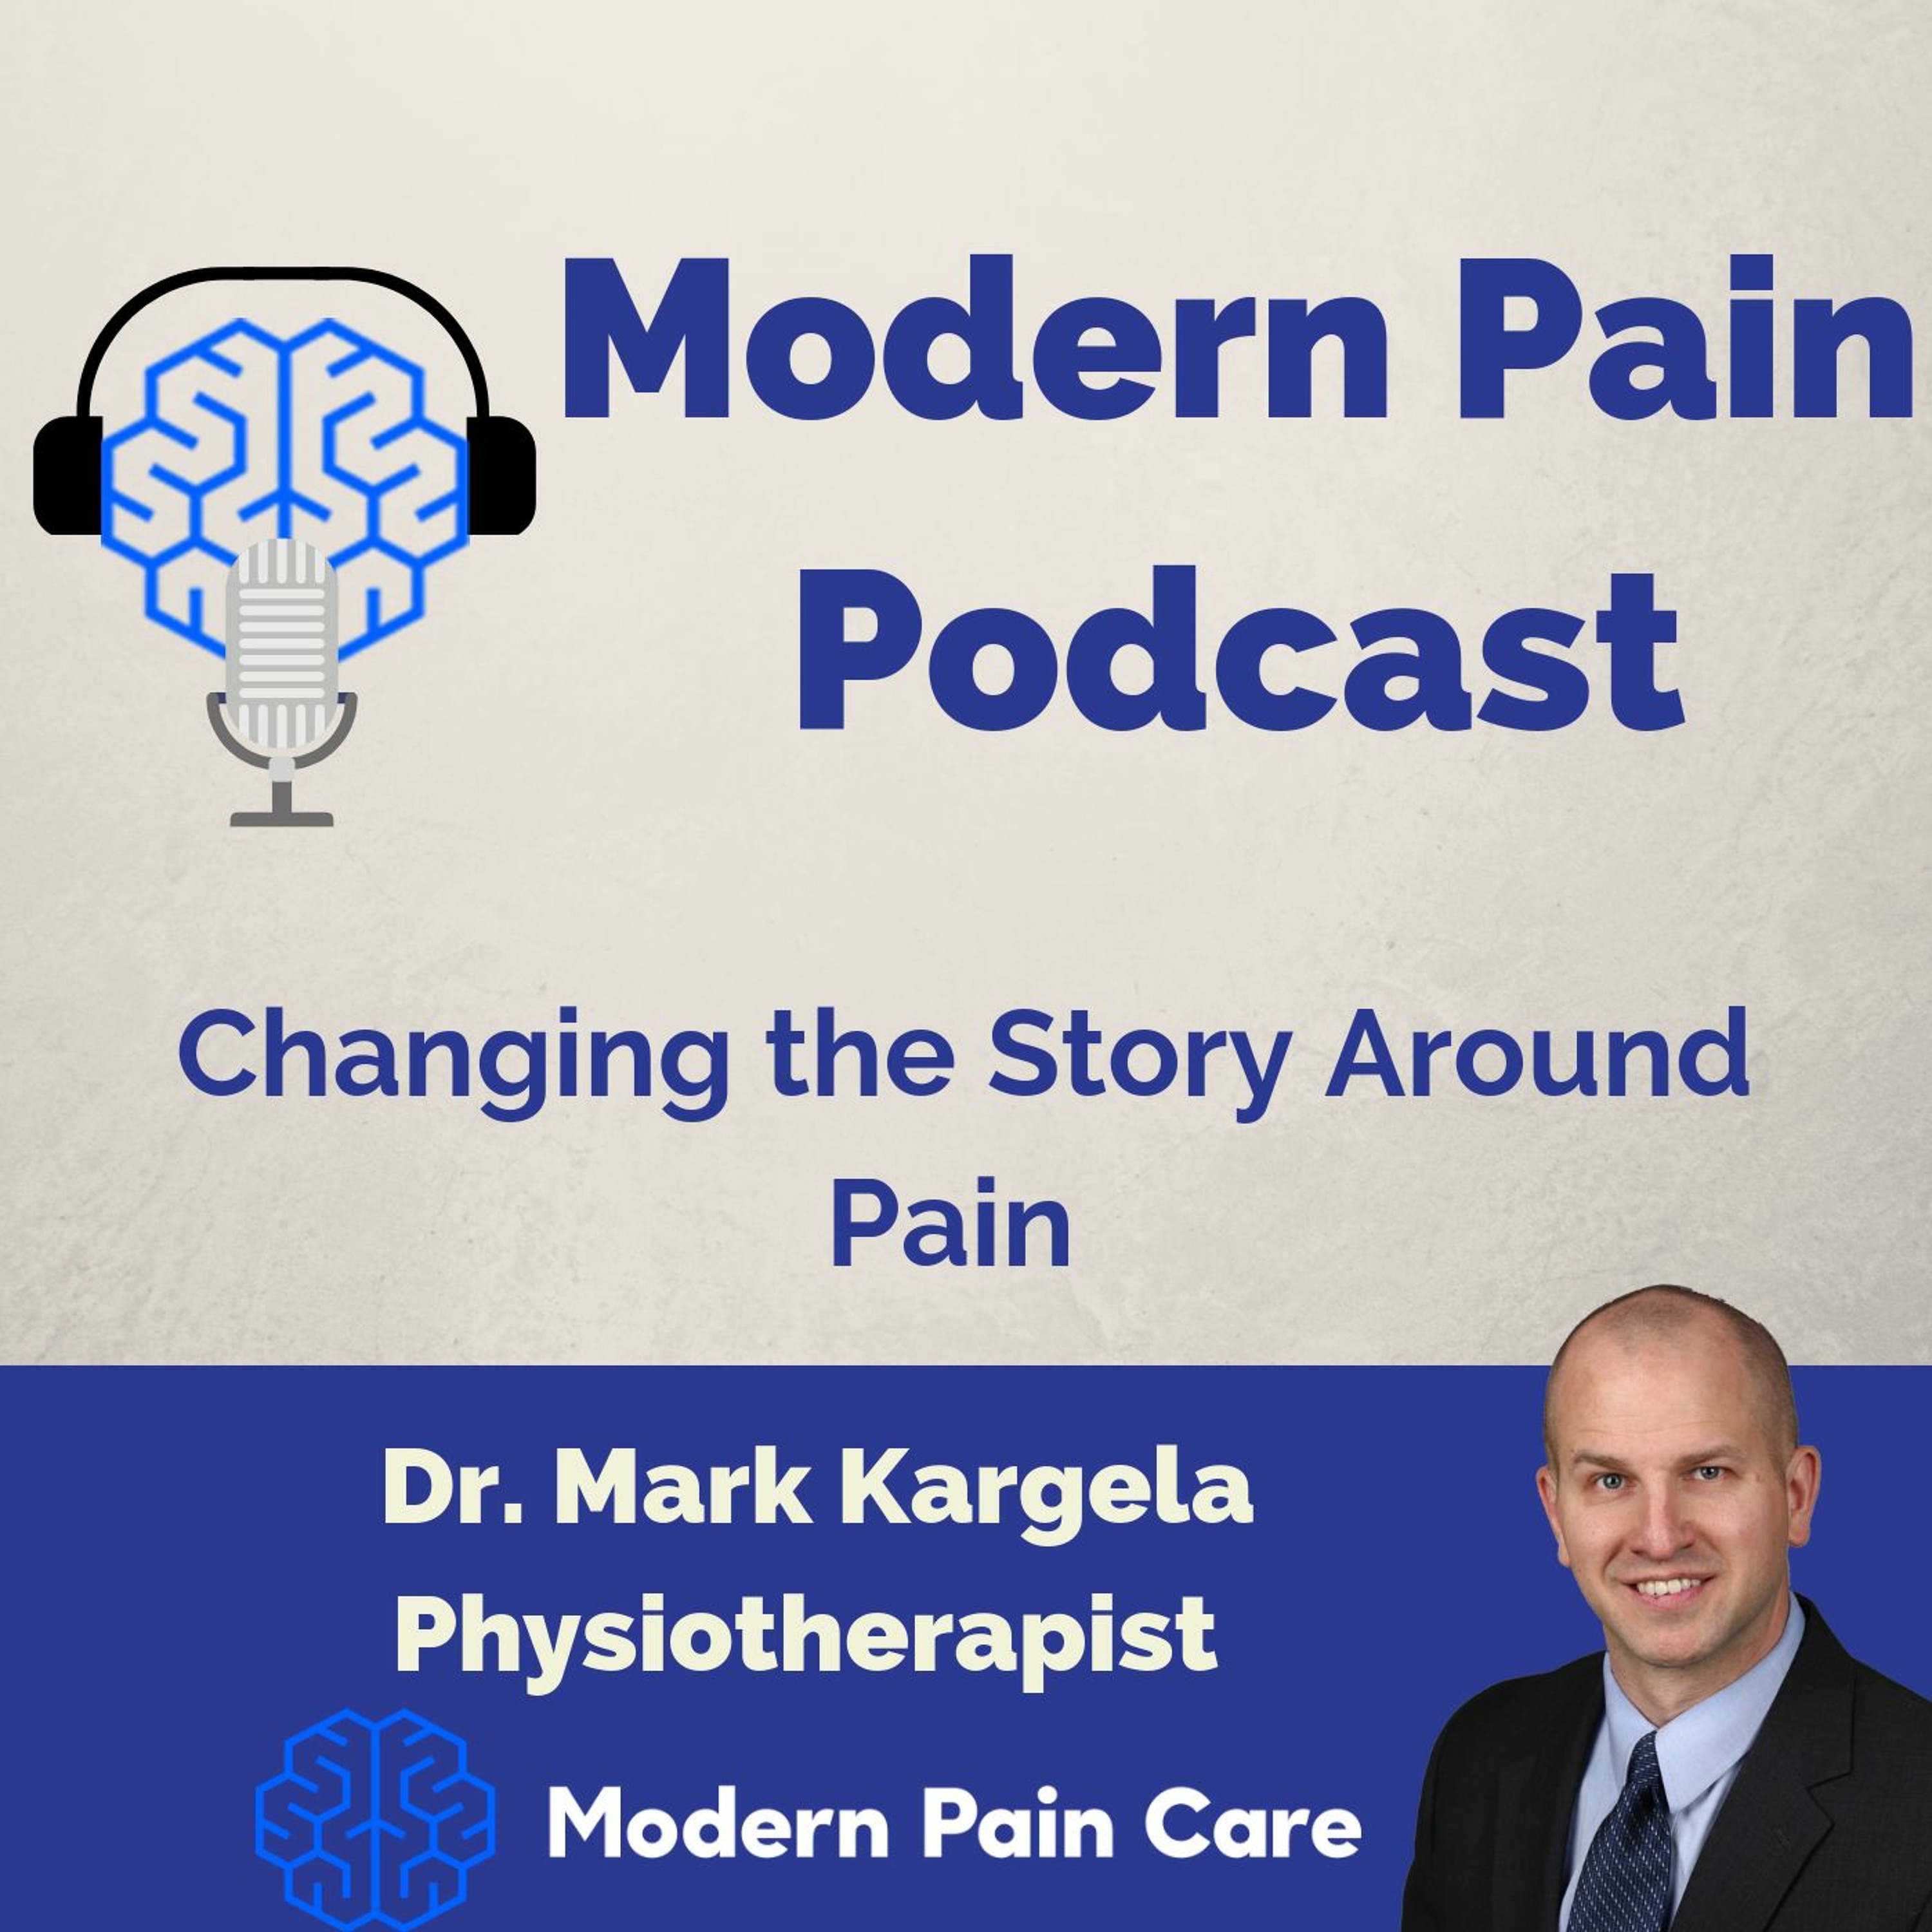 Modern Pain Podcast - Episode 5 - Interview with Mick Thacker